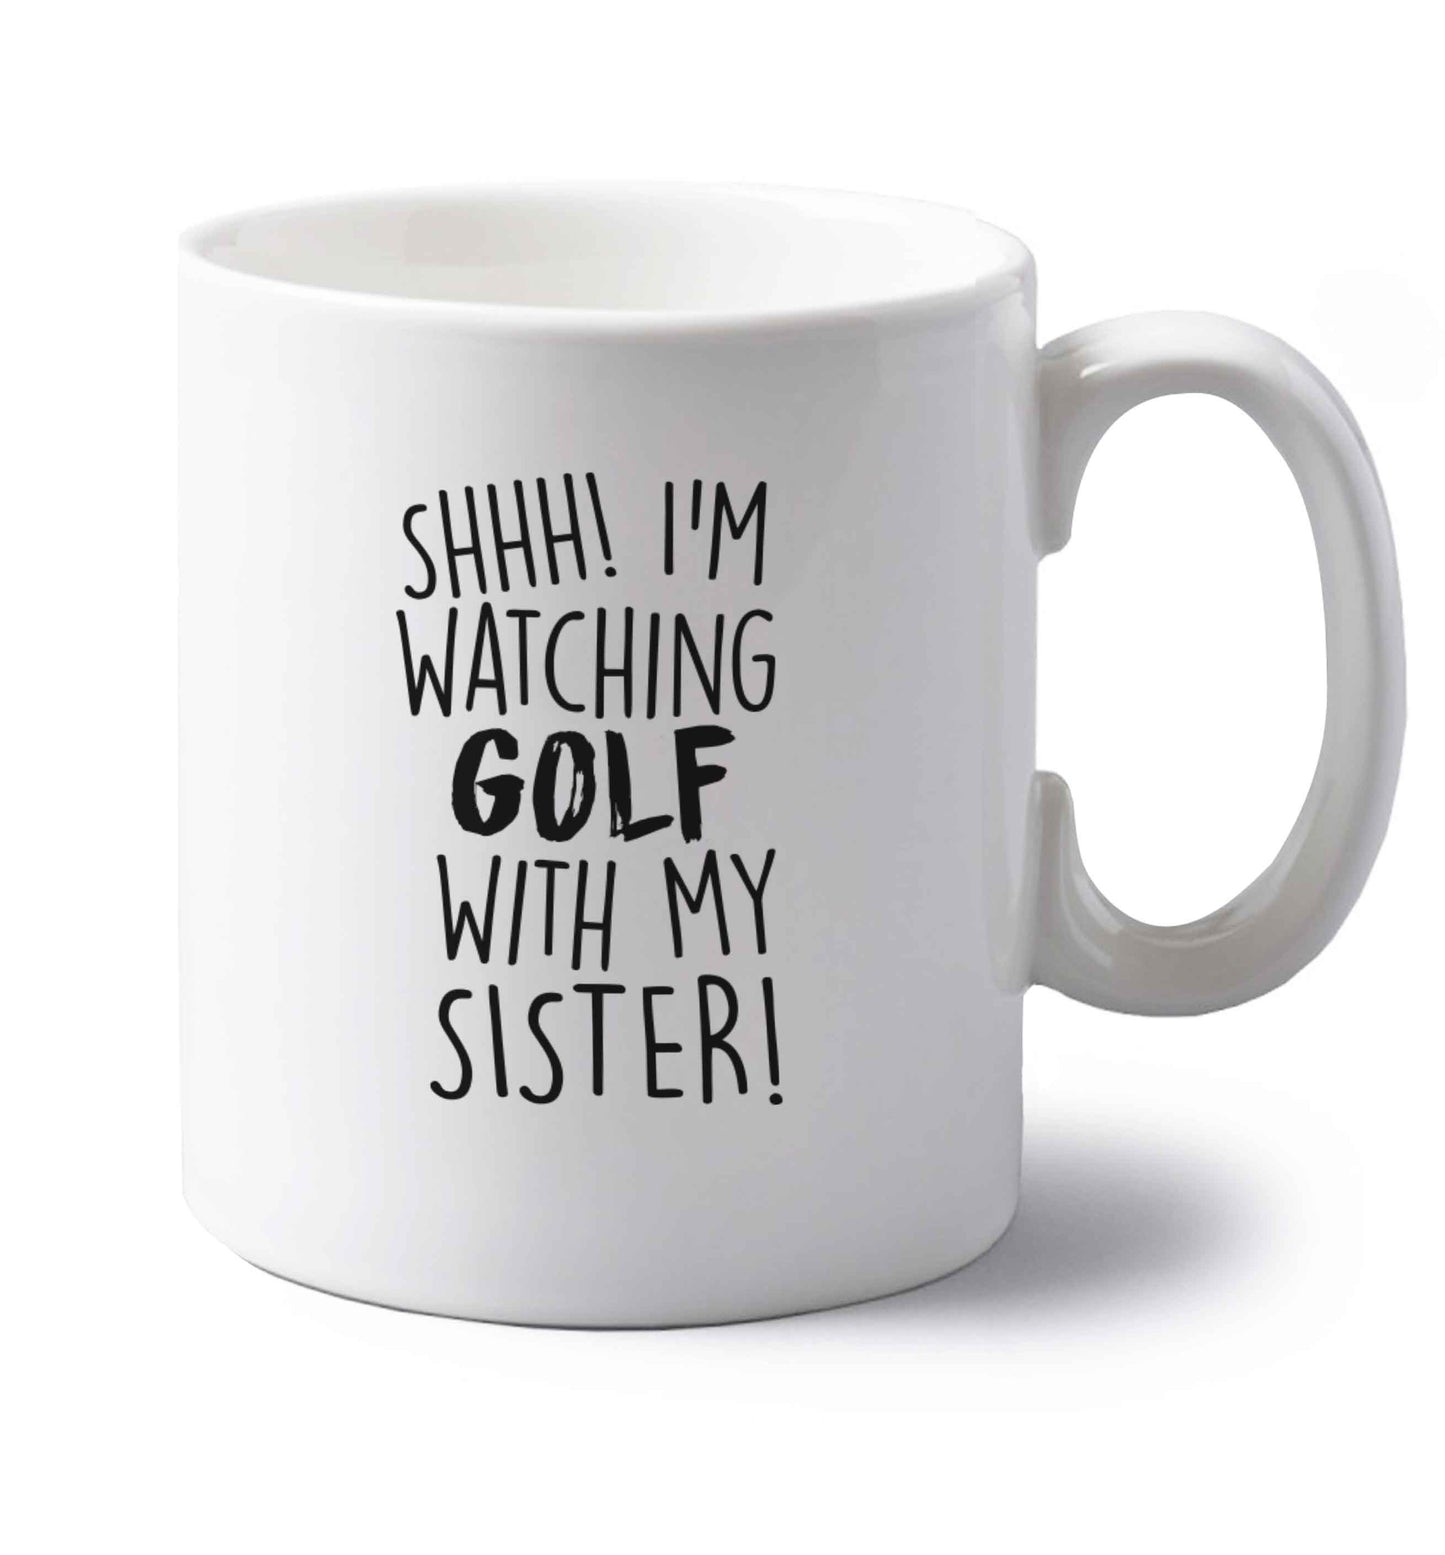 Shh I'm watching golf with my sister left handed white ceramic mug 